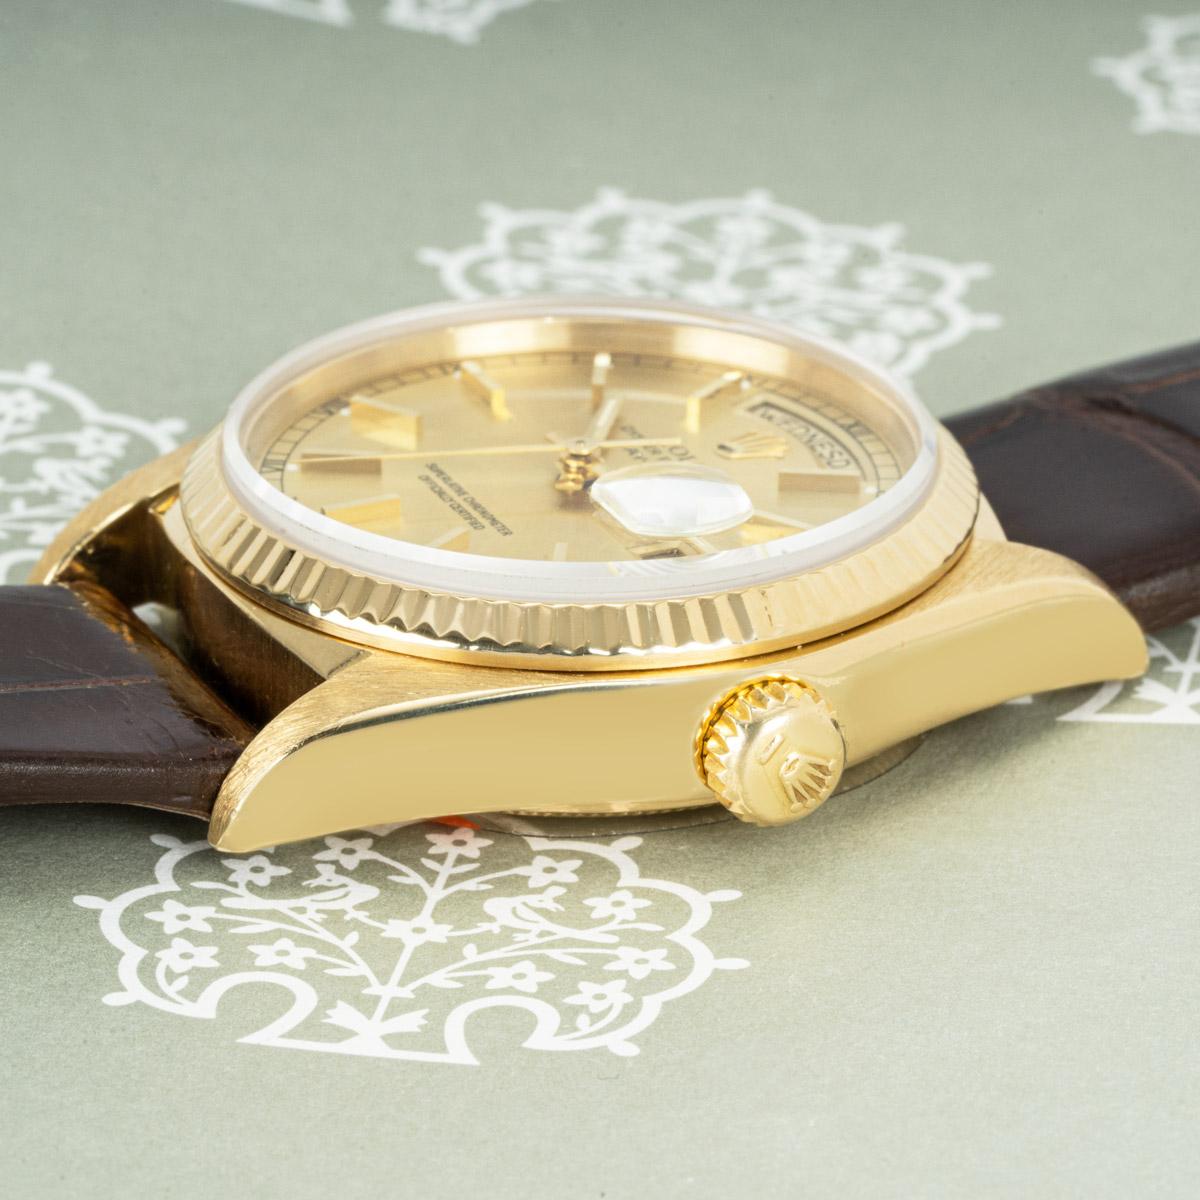 A yellow gold Day-Date by Rolex. Featuring a champagne dial with applied hour markers and a fluted yellow gold bezel. The watch is presented on a generic brown leather strap and equipped with a gold plated pin buckle. Fitted with a sapphire glass